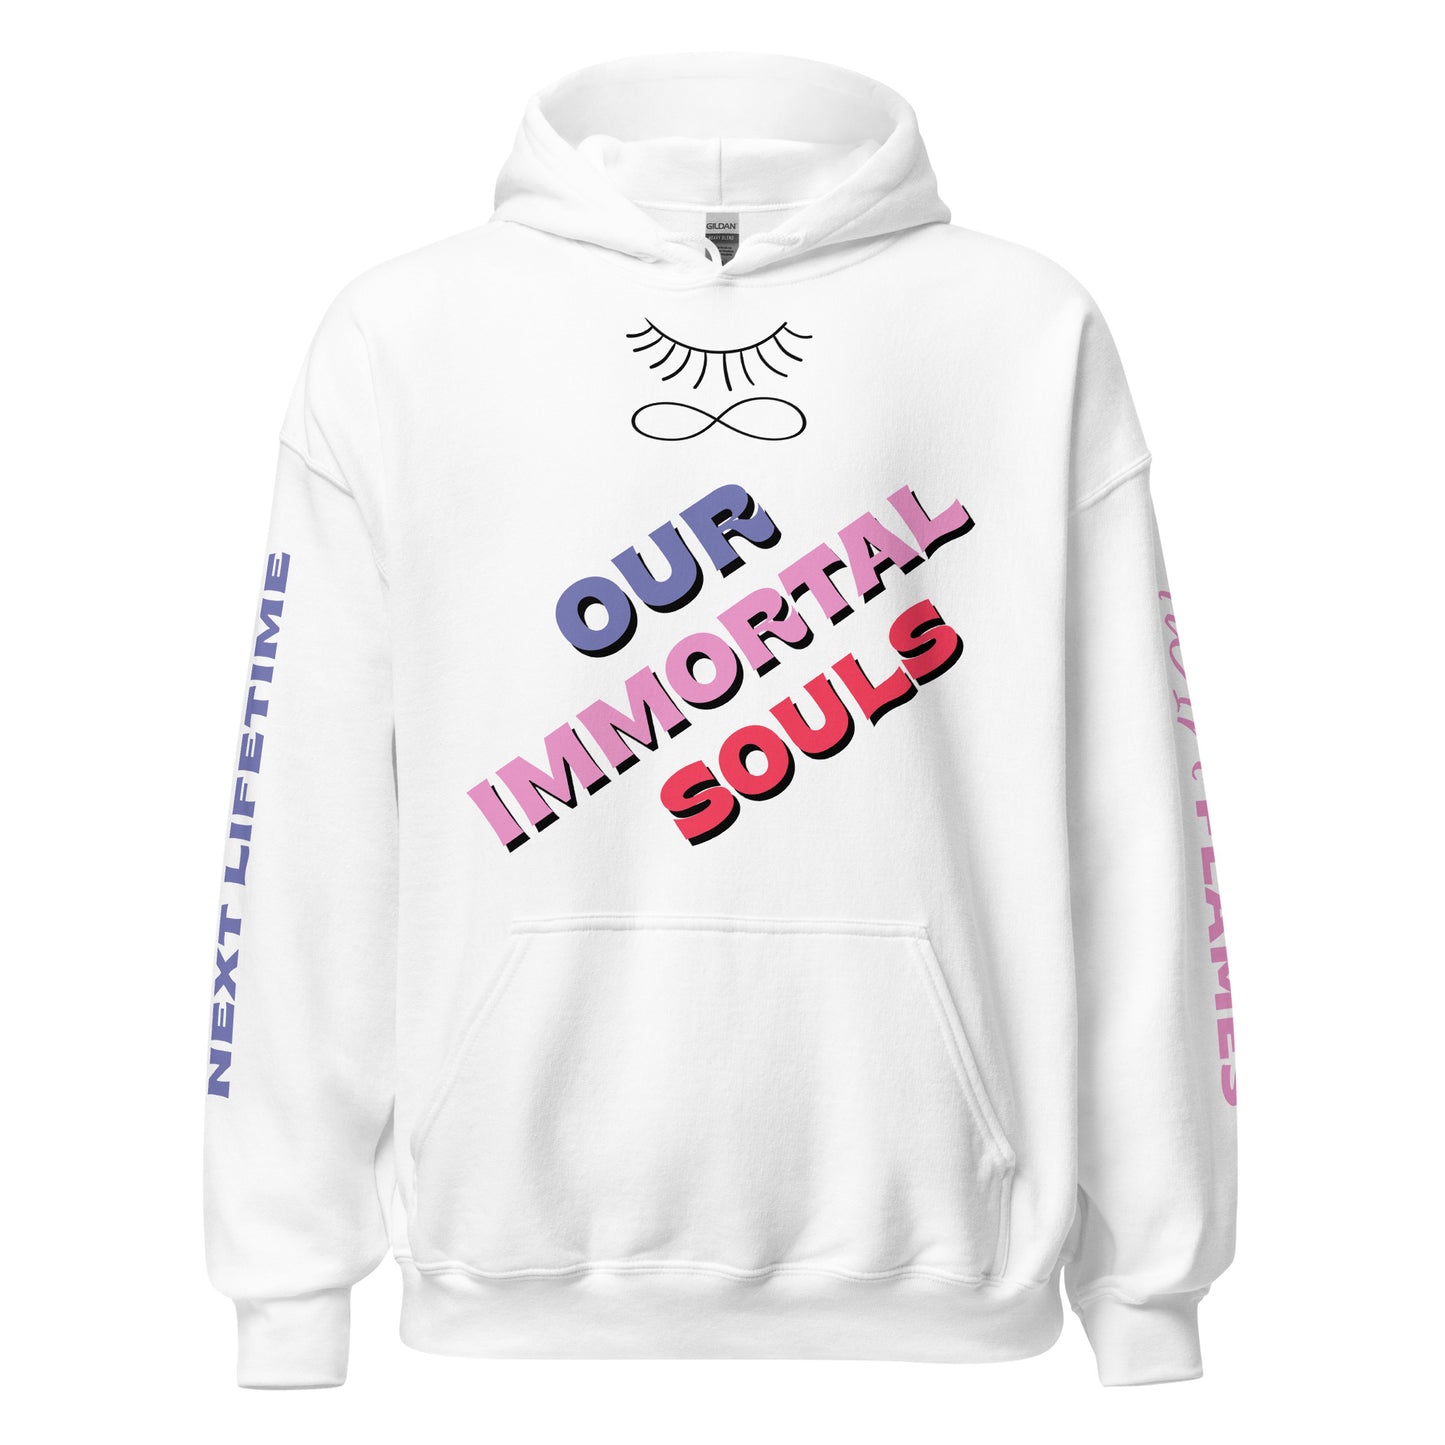 White unisex graphic hoodies for women and for men. Custom text hoodie with words and logo on the front/back/sleeves. Hoodies with black closed eye/infinity sign logo with bluish, lavenderish, pinkish/redish colorful "OUR IMMORTAL SOULS" text design on front. Oversized hoodies: Sizes 5X, 4X, 3X, 2X. Hoodies for adults XL, L, M, and S. Sweatshirts with double-lined hood, matching drawstrings, pouch pocket, rib-knit cuffs and cotton/polyester blend. JAMILLIAH'S WISDOM IS TIMELESS SHOP - wisdomistimeless.com.